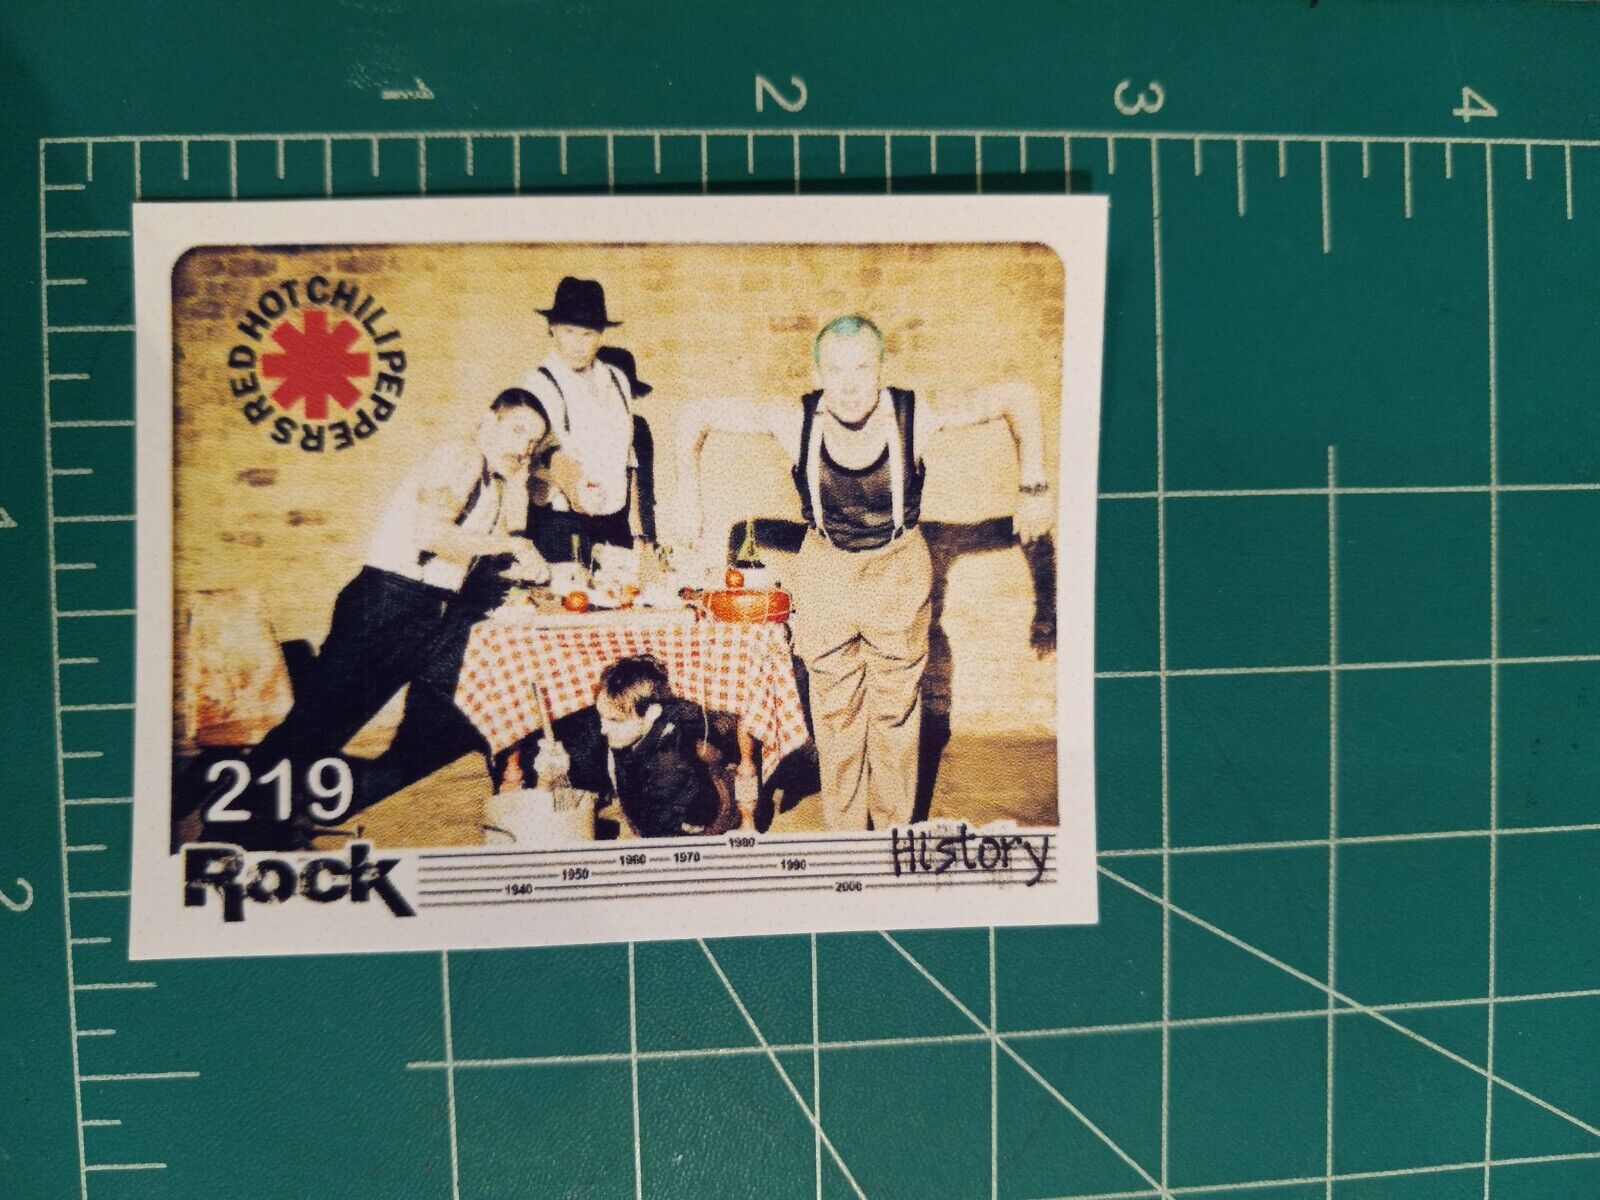 2020 ROCK HISTORY music Sticker Card Brazil RED HOT CHILI PEPPERS GROUP BAND 219